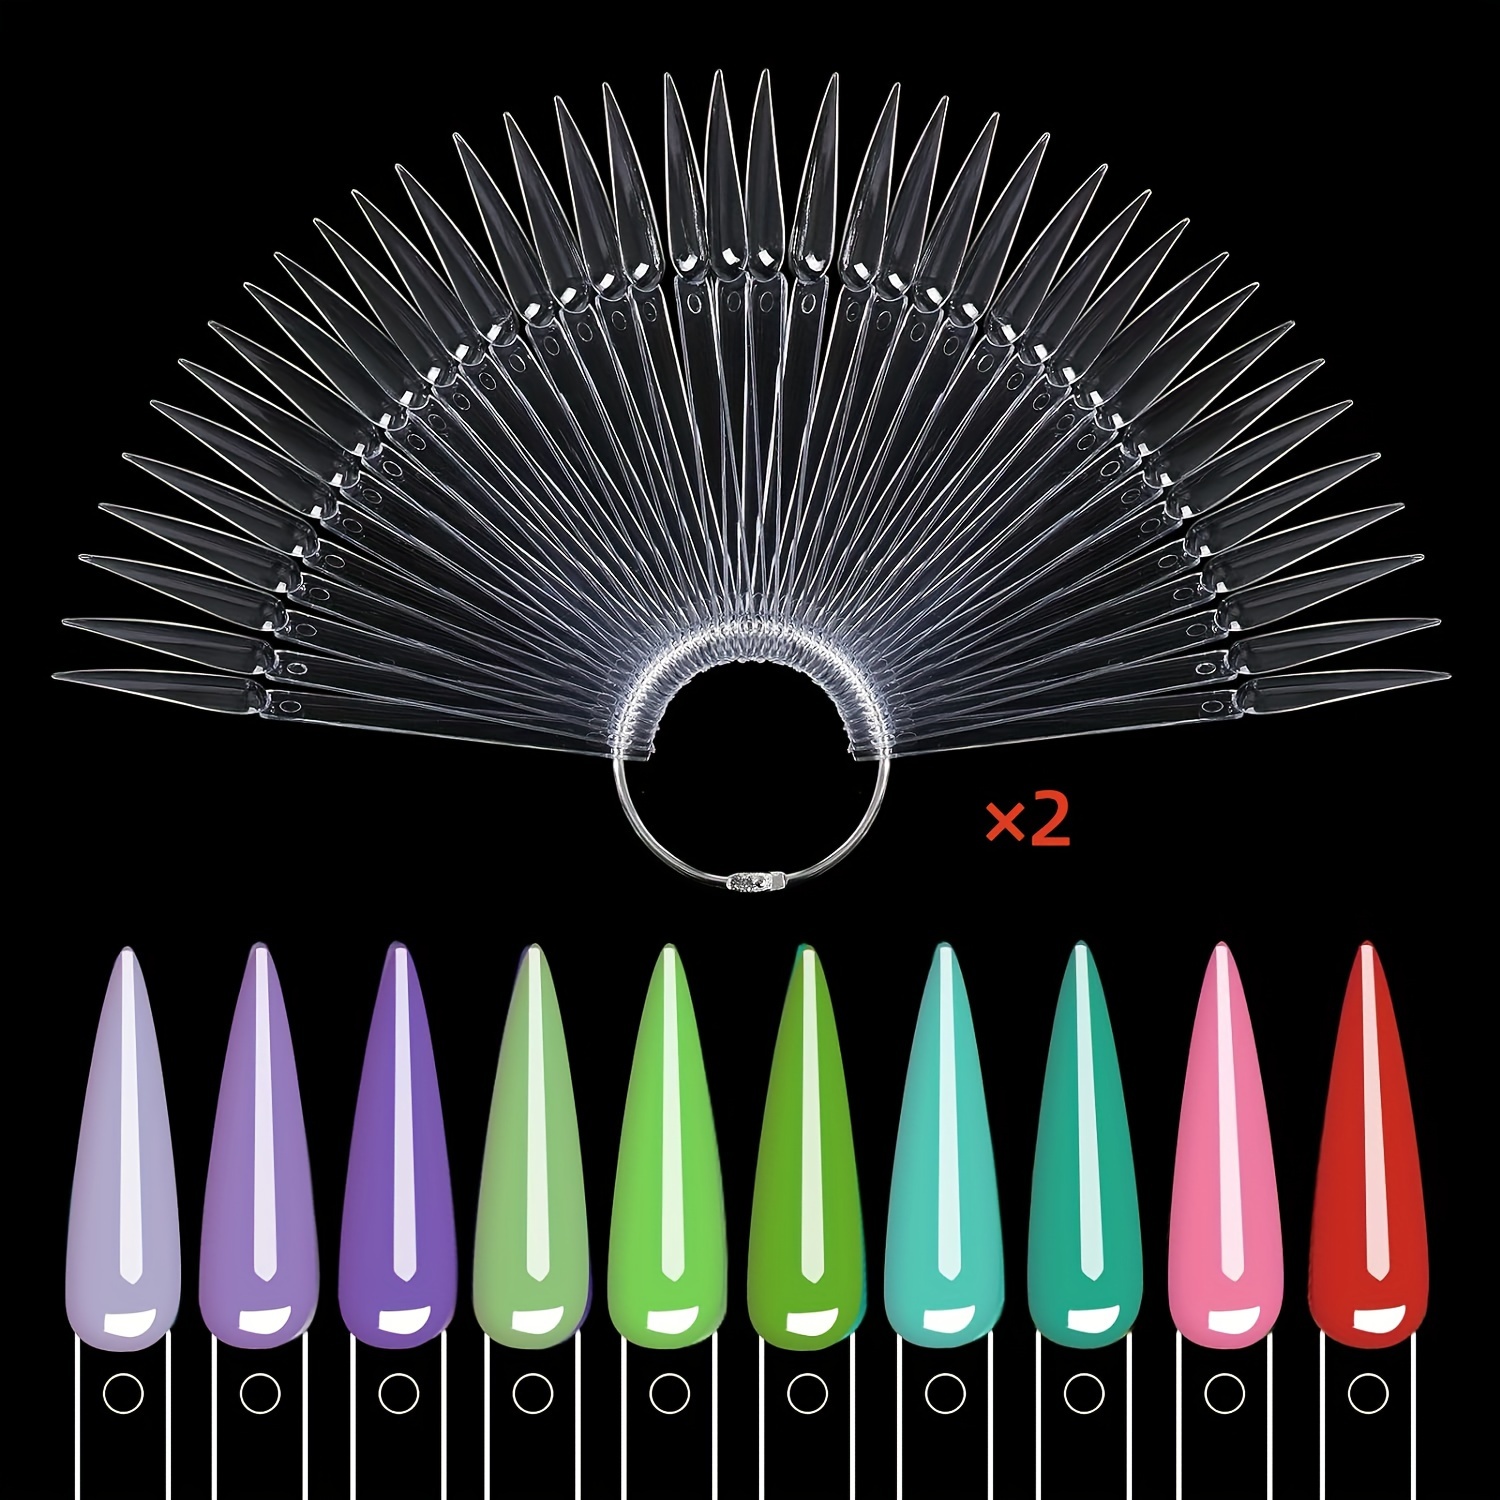 

100pcs Unscented Practice Nail Tips - Color Display Fan Shape Nail Polish Sticks For Gel Polish Display And Nail Art Practice